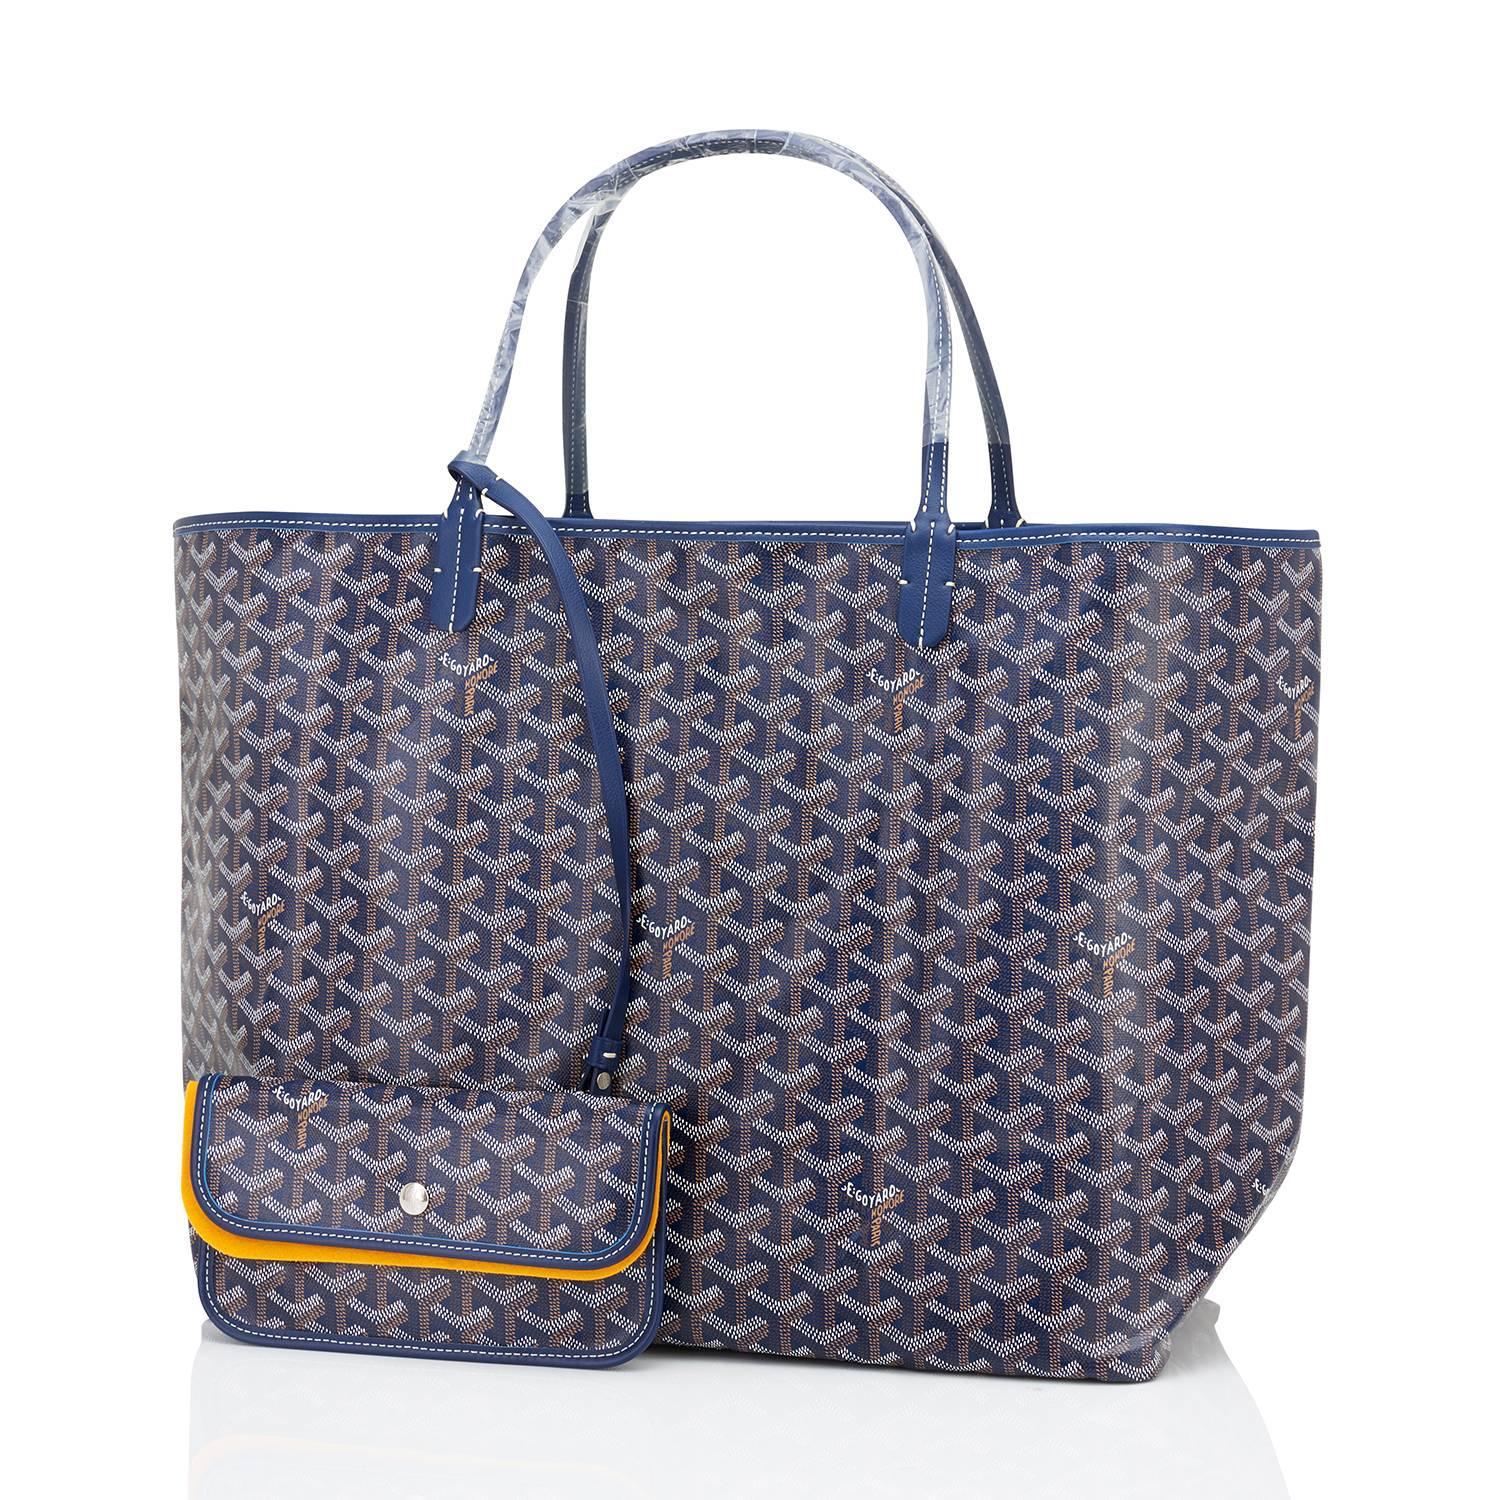 Goyard Bleu Marine Navy Blue St Louis GM Chevron Tote Bag 
Brand New. Store Fresh. Pristine Condition (with plastic on handles) 
Perfect gift! Comes with yellow Goyard sleeper and inner organizational pochette. 
This is the famous Goyard Chevron